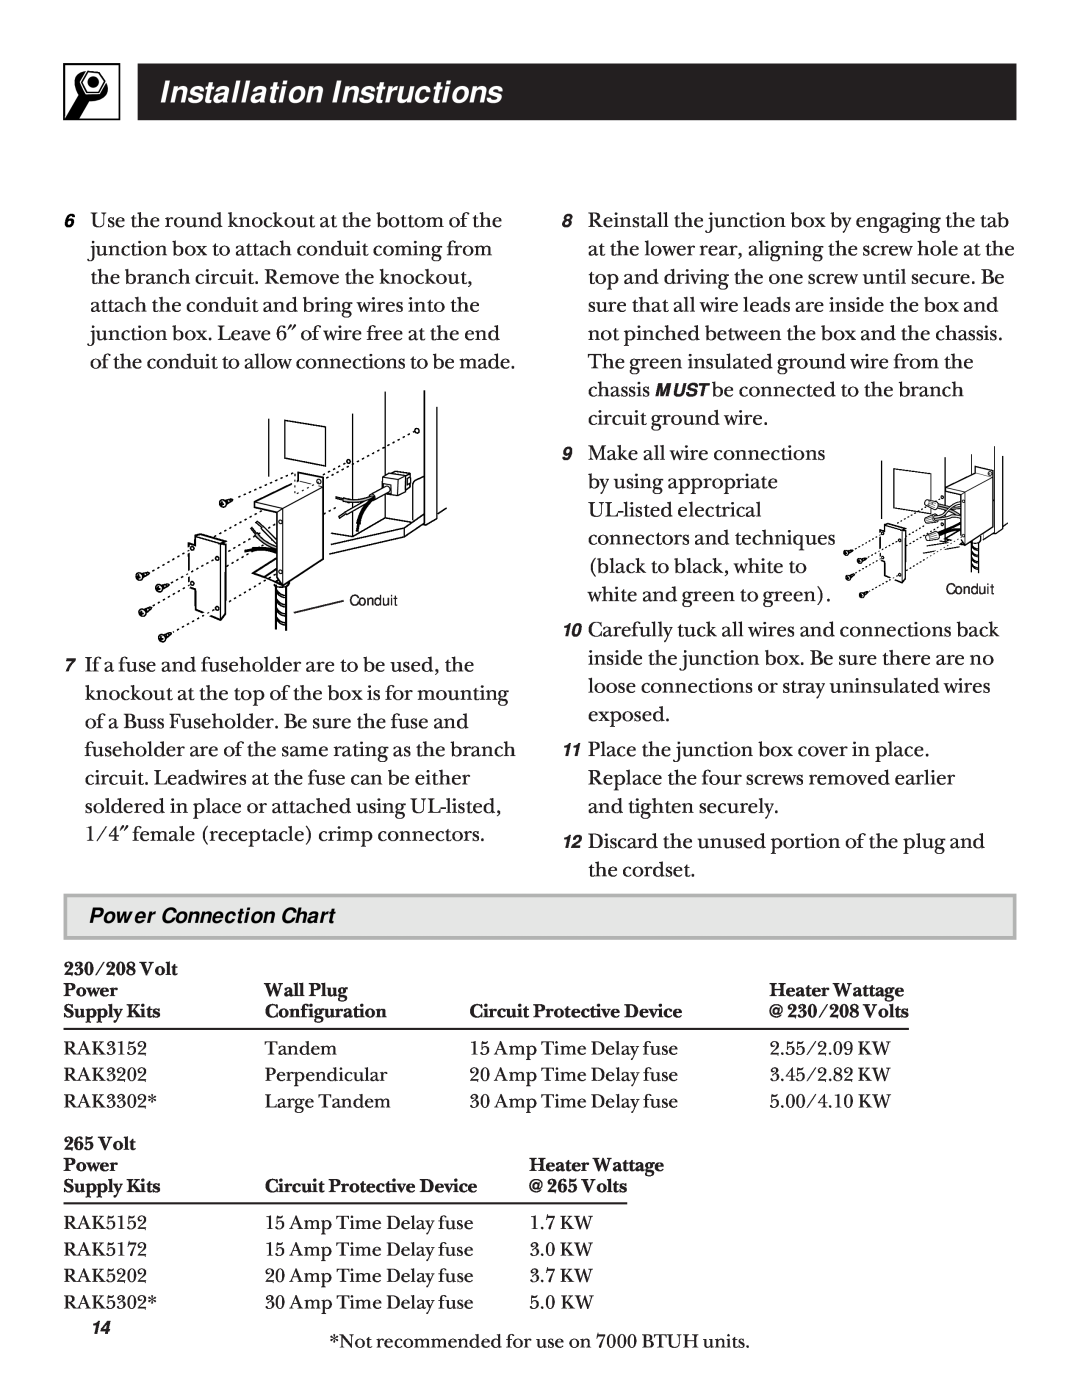 GE 5200 installation instructions Power Connection Chart, Installation Instructions 